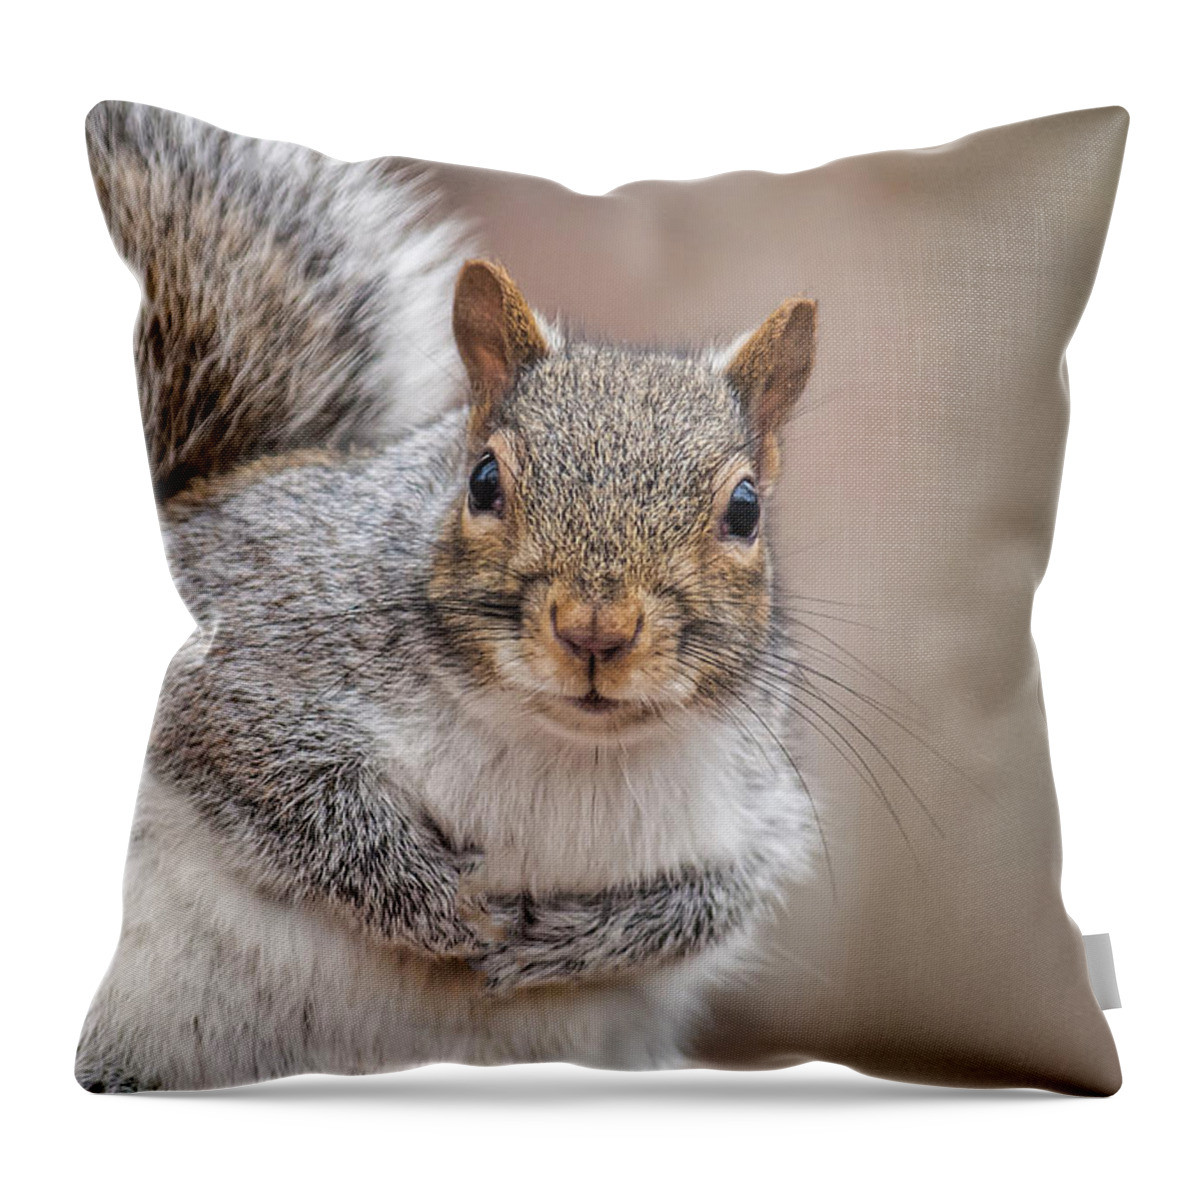 Squirrel Throw Pillow featuring the photograph Greetings by Cathy Kovarik